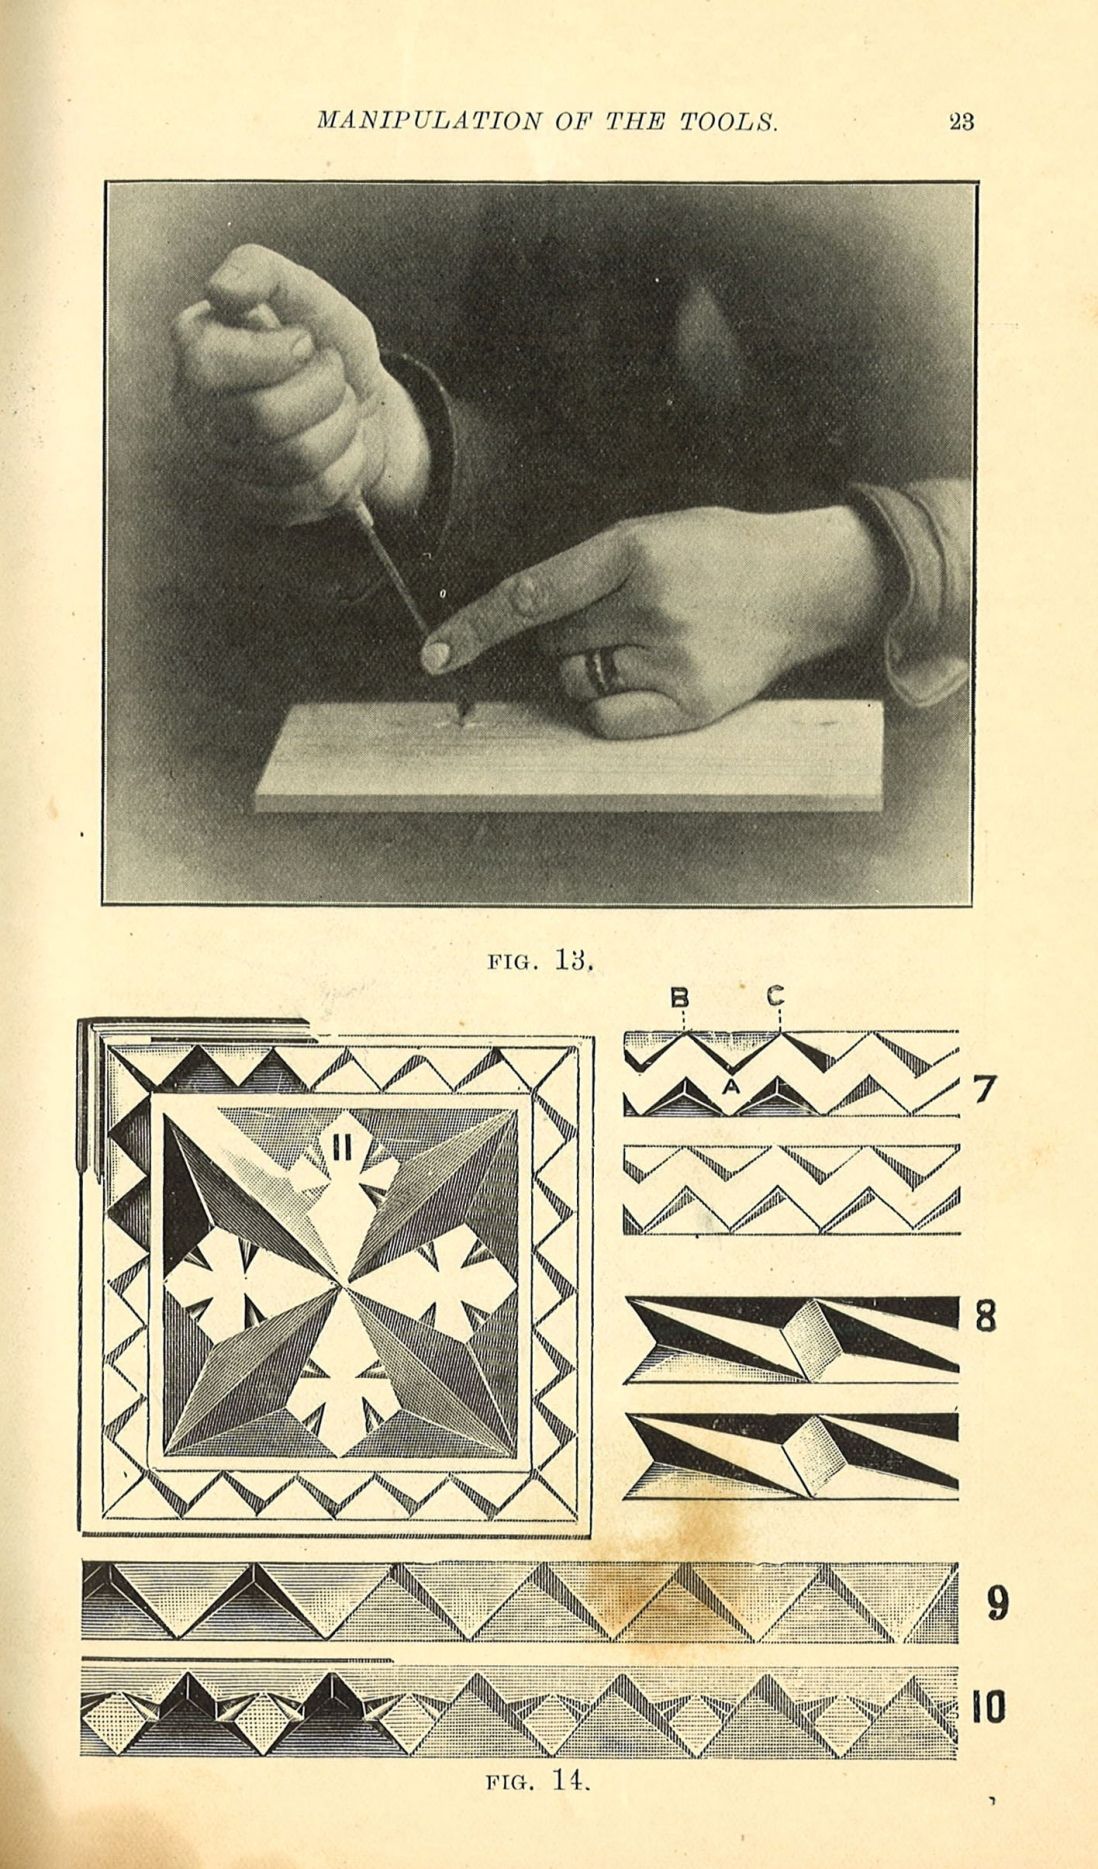 Chip-carving manual  Demonstration of chip carving as featured in: W. Jackson Smith, Chip-carving as a recreation: a practical manual for amateurs, L. Upcott Gill, London, 1903. For more information about this item, see the library catalogue.  Many amateurs gained instruction from magazines, newspaper articles and practical manuals.  The technique was considered to be adaptive to amateurs due to the utilisation of easily worked timbers and low relief decoration (generally not exceeding 5mm).  Caroline Simpson Library & Research Collection, Museums of History NSW. RB 745.51 SMI.